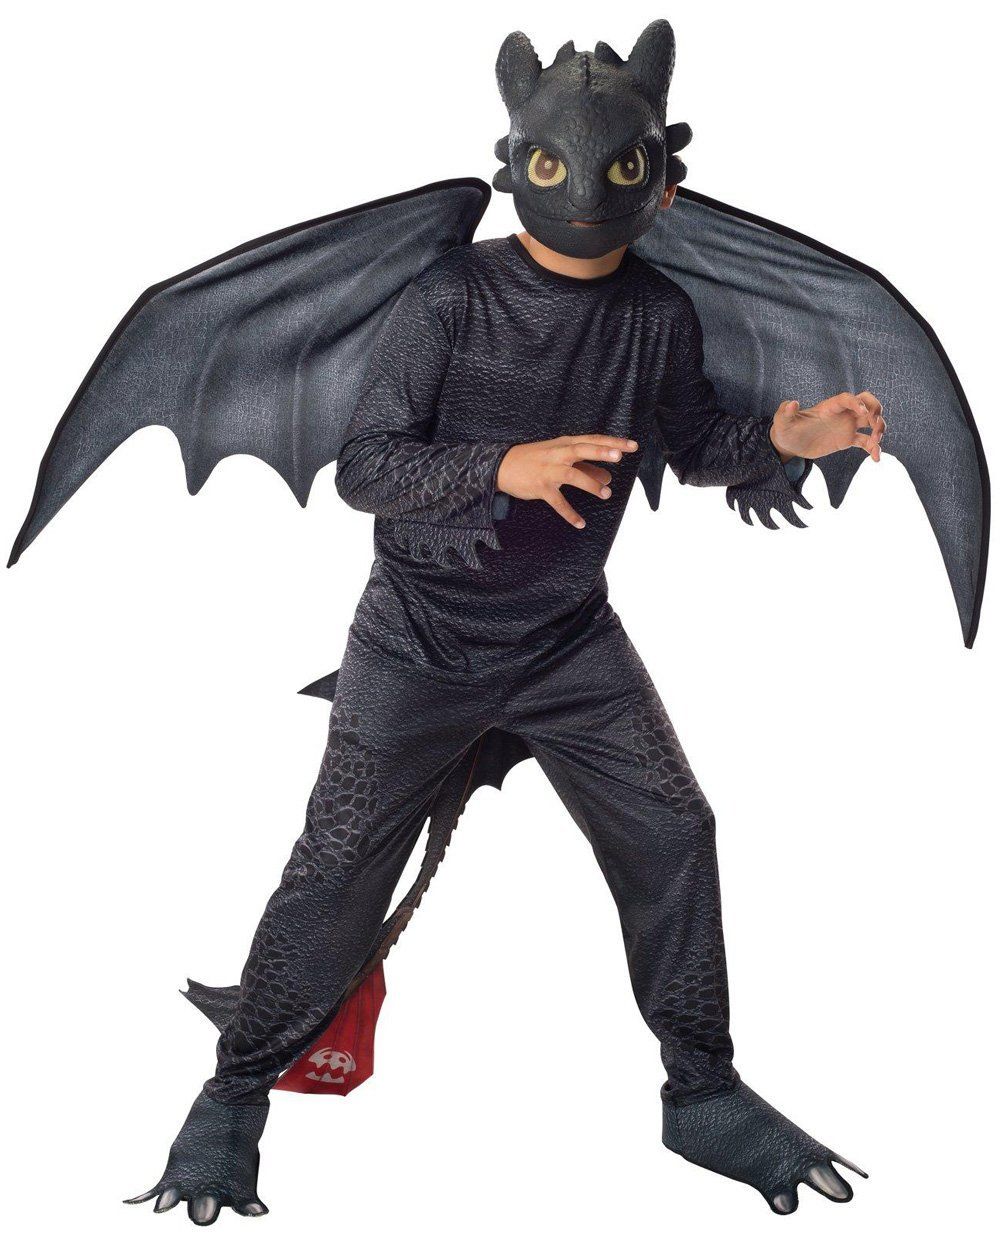 Night Fury Toothless Costume How To Train Your Dragon_3